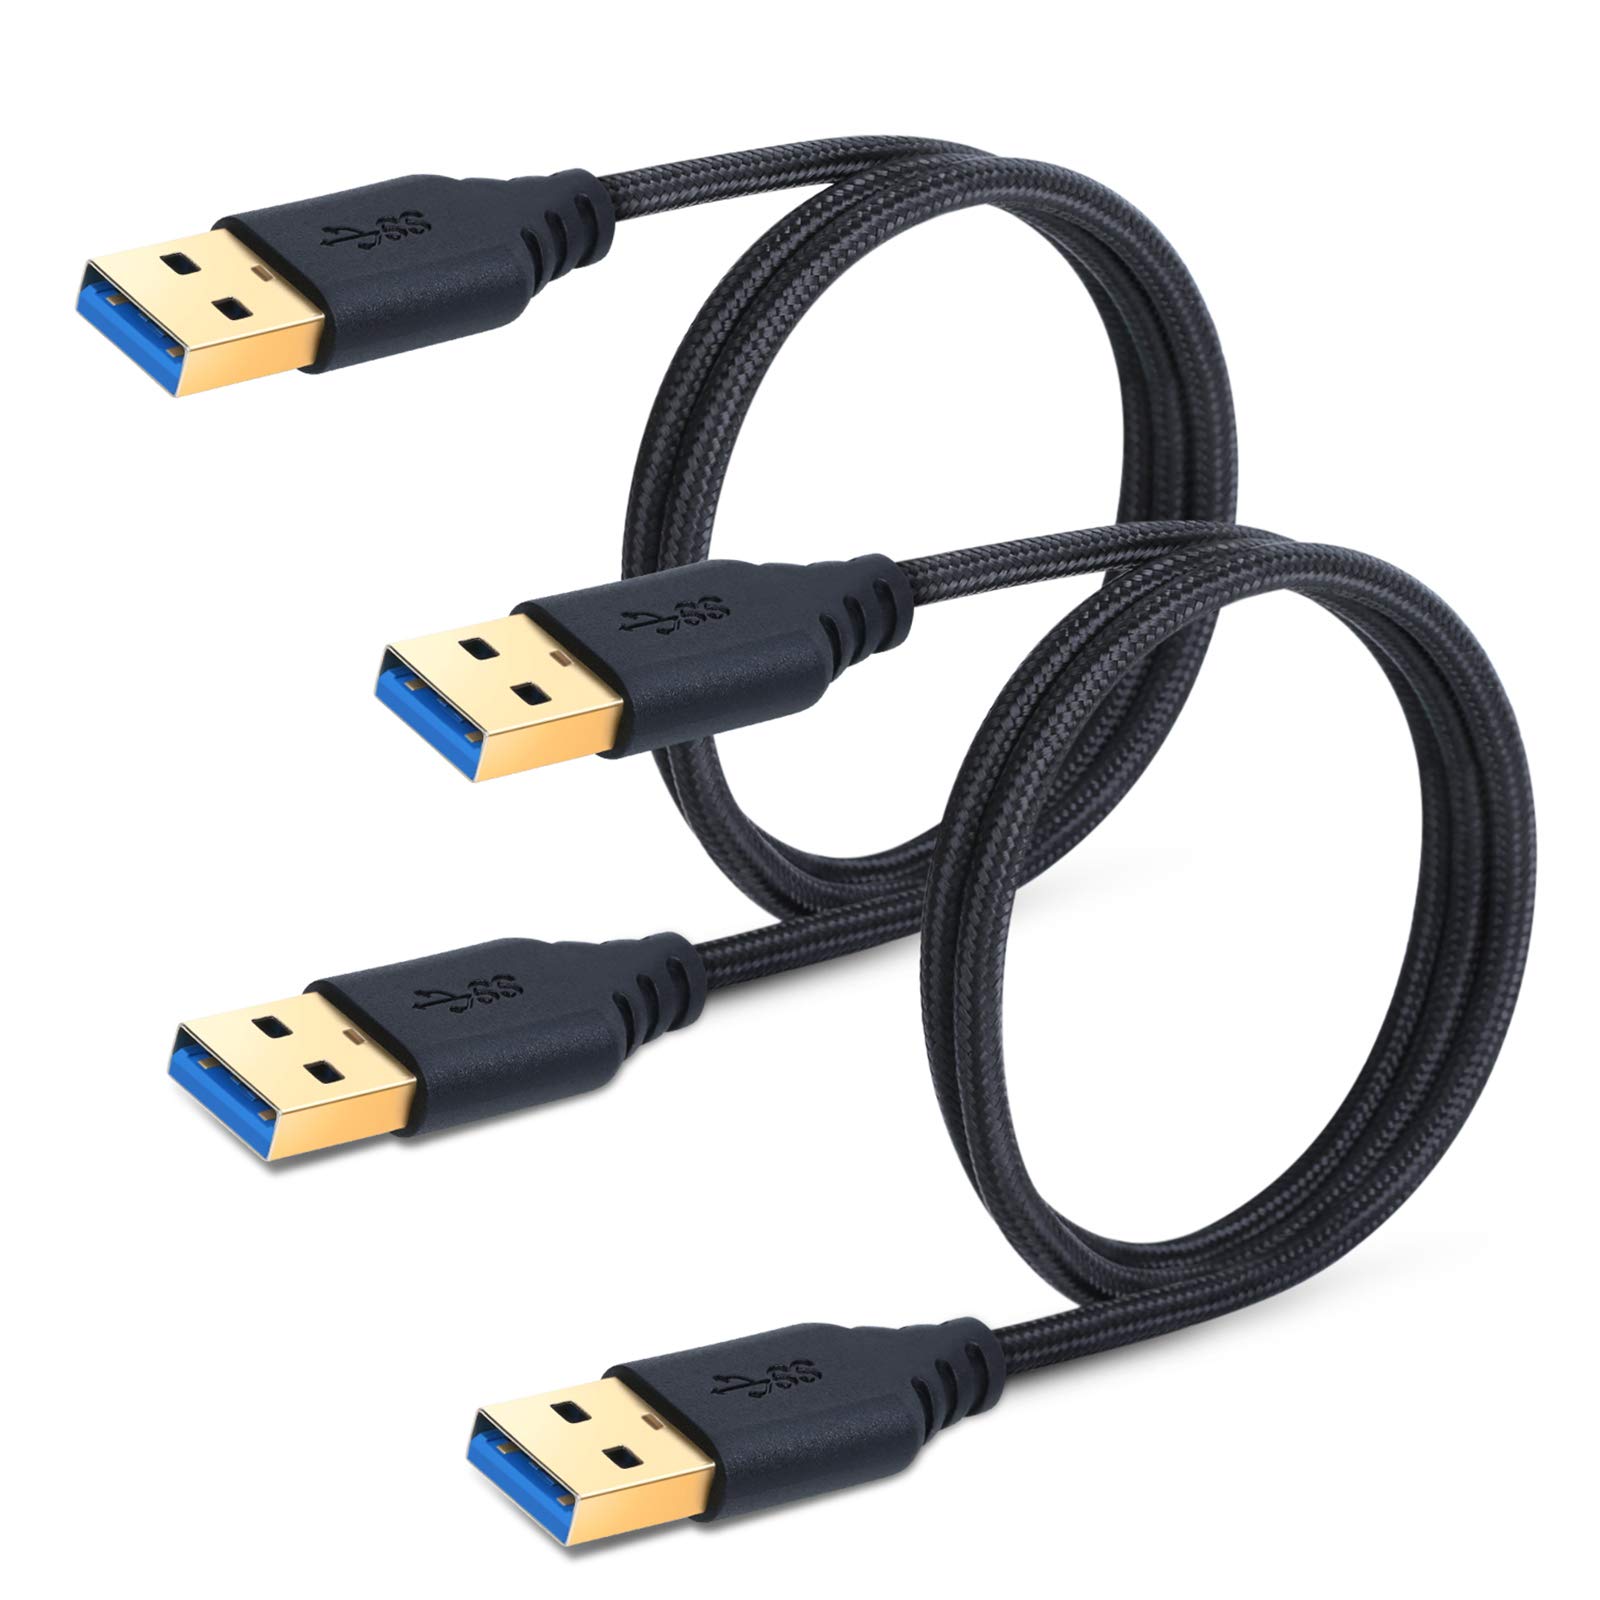 Book Cover Besgoods USB to USB Cable Cord, 2-Pack 3FT/1M Braided USB 3.0 Type A Male to Male Cable - Short Male to Male USB Cable for Data Transfer, Hard Drive Enclosures, DVD Player, Laptop Cooler and More Black